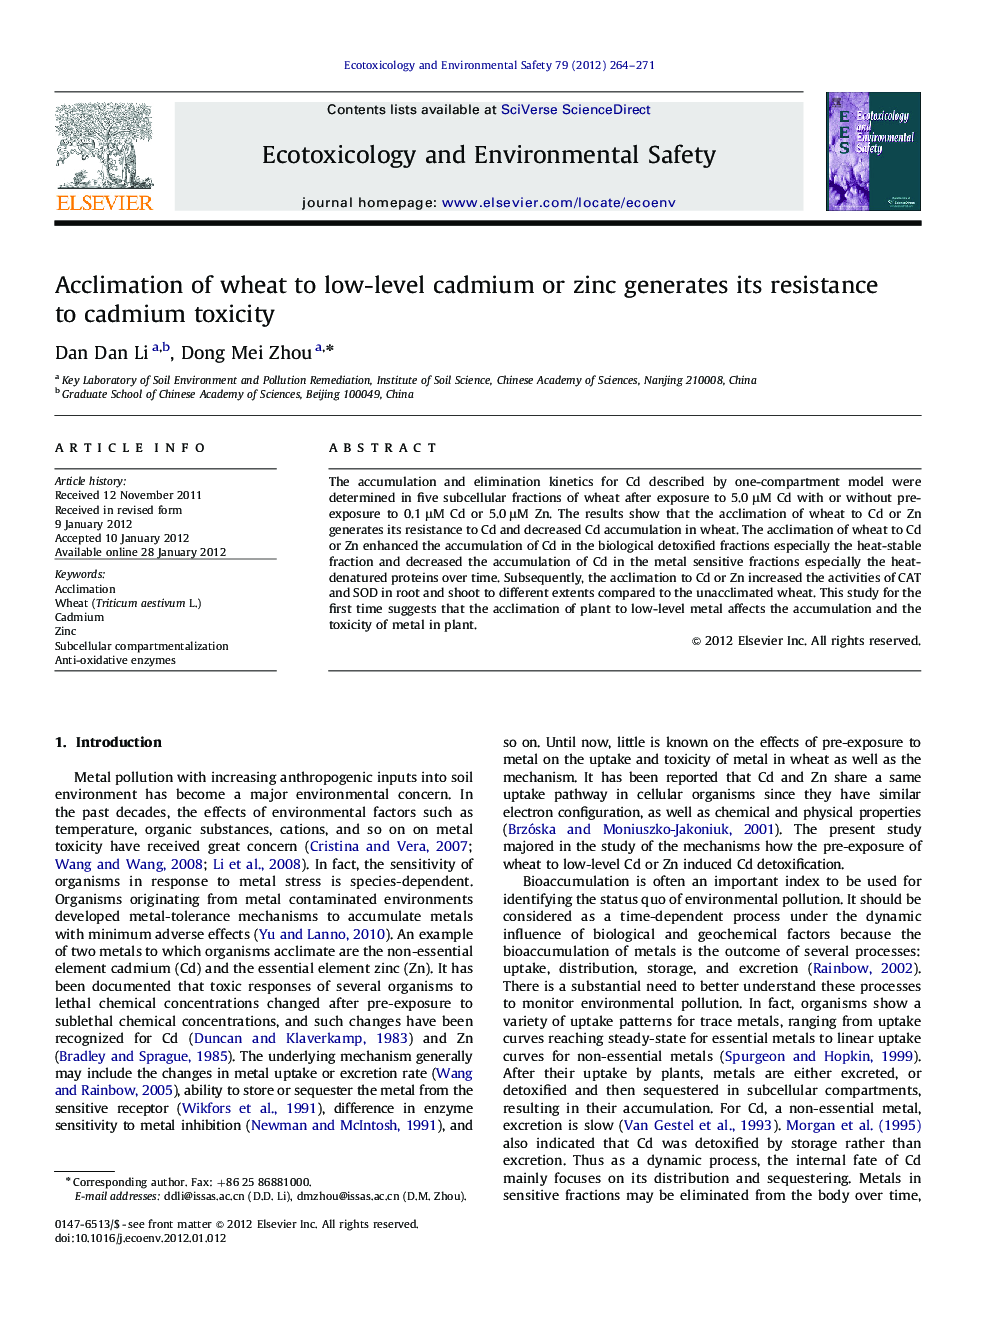 Acclimation of wheat to low-level cadmium or zinc generates its resistance to cadmium toxicity